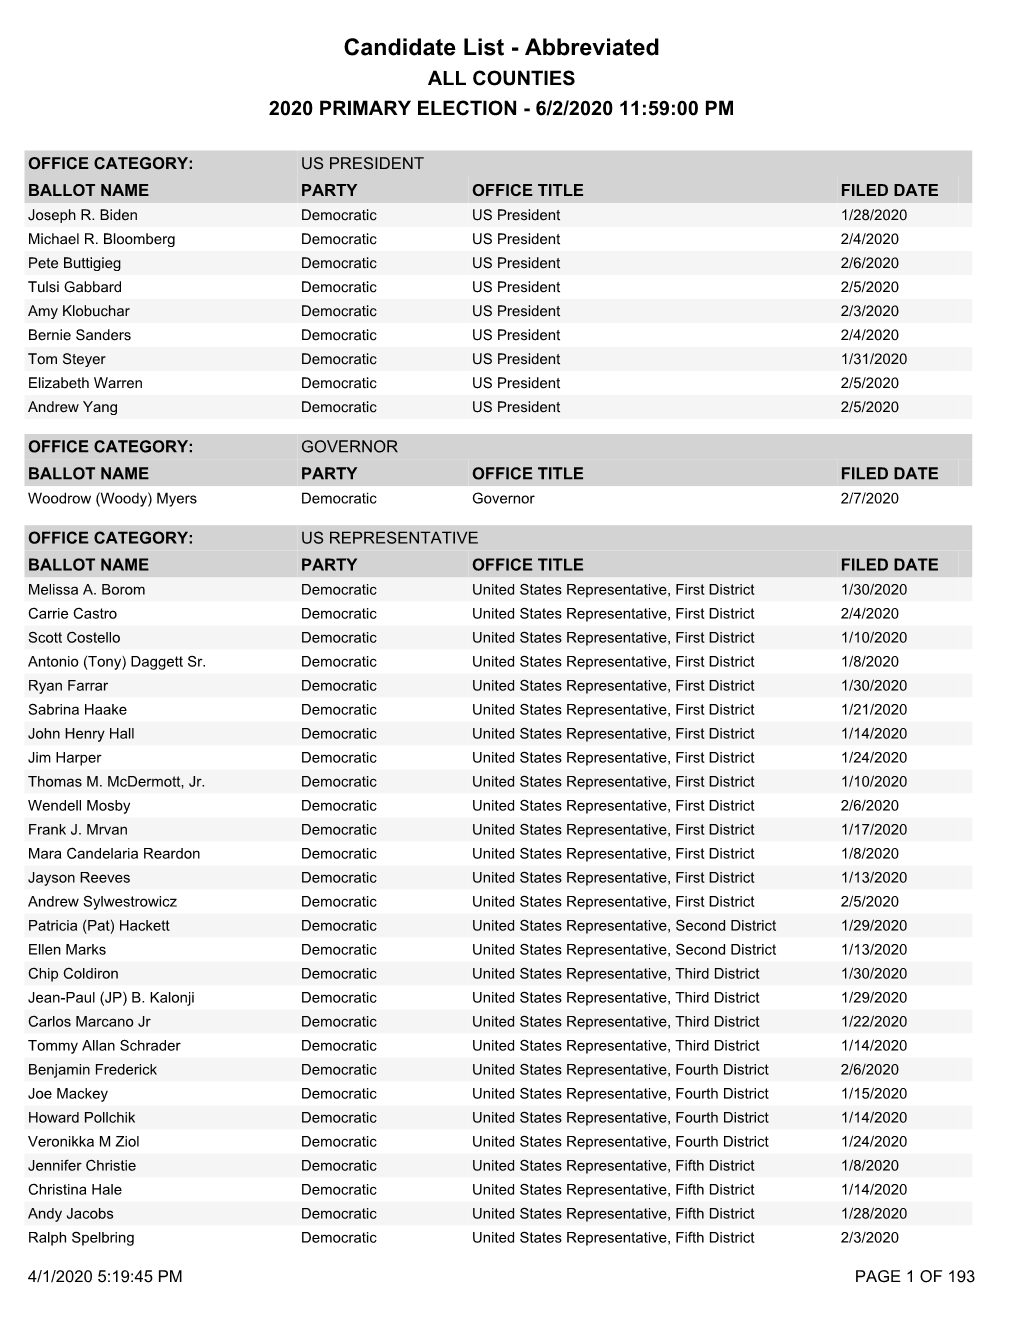 Candidate List - Abbreviated ALL COUNTIES 2020 PRIMARY ELECTION - 6/2/2020 11:59:00 PM